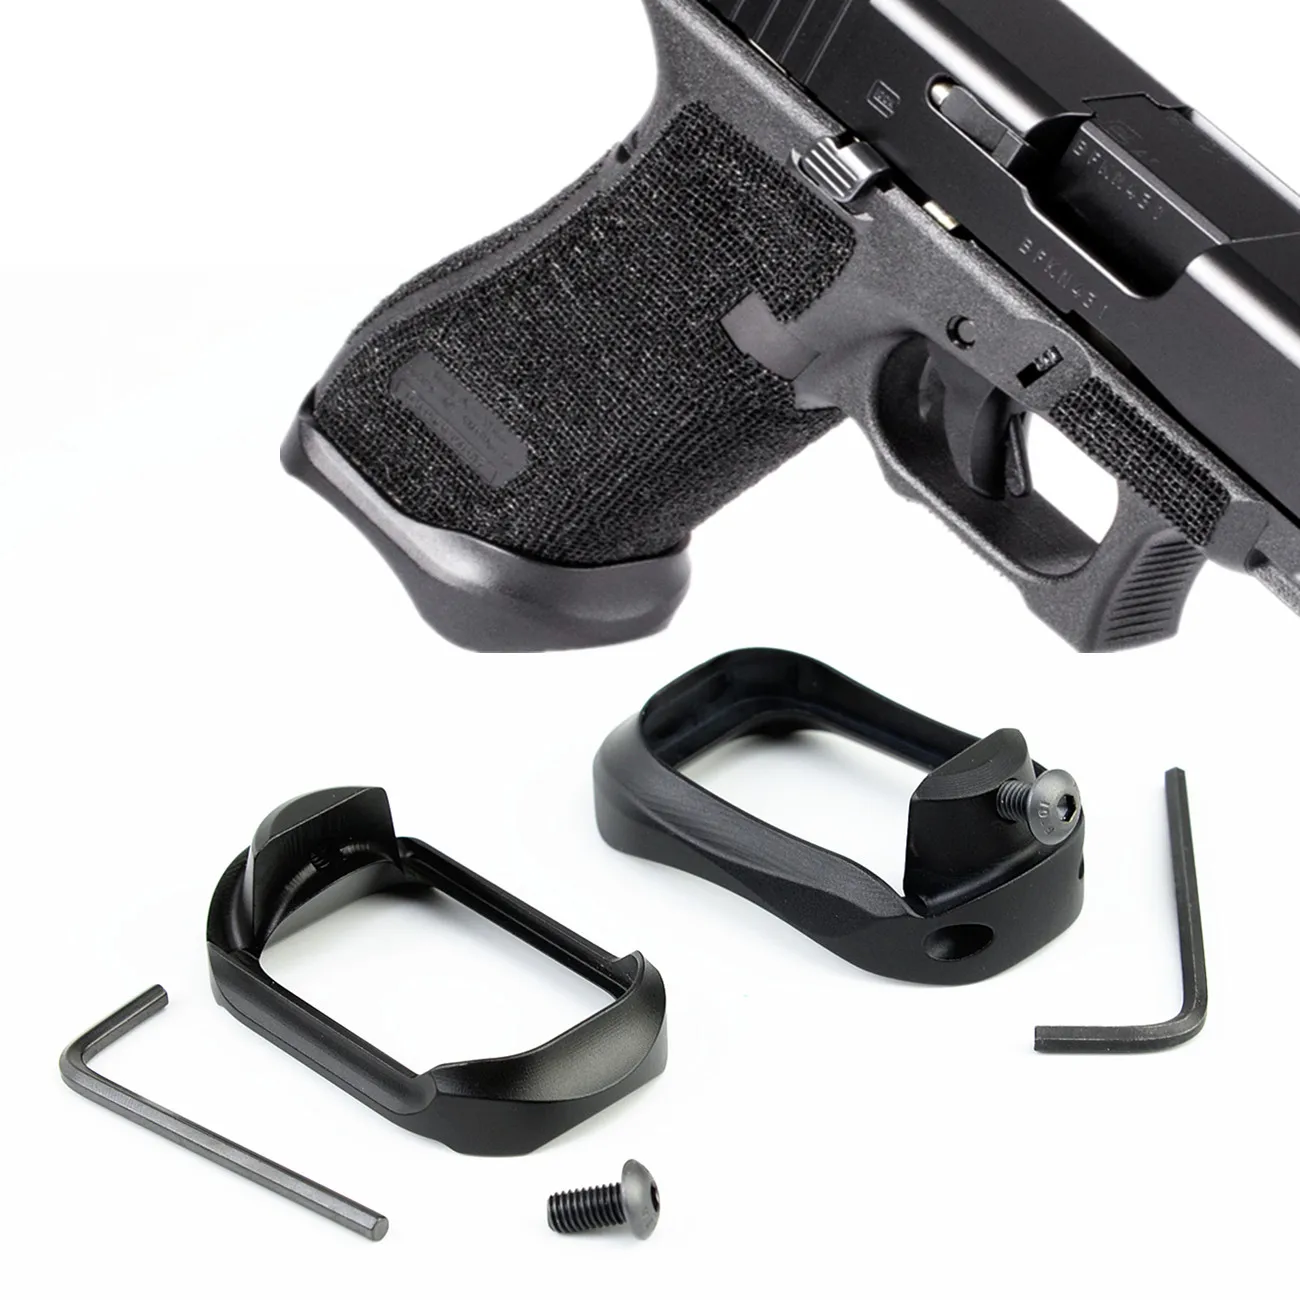 CNC Alloy Grip Ring Base Pad Adapter For PRO Plus Magwell Glock 17 22 Gen1 2 3 4 